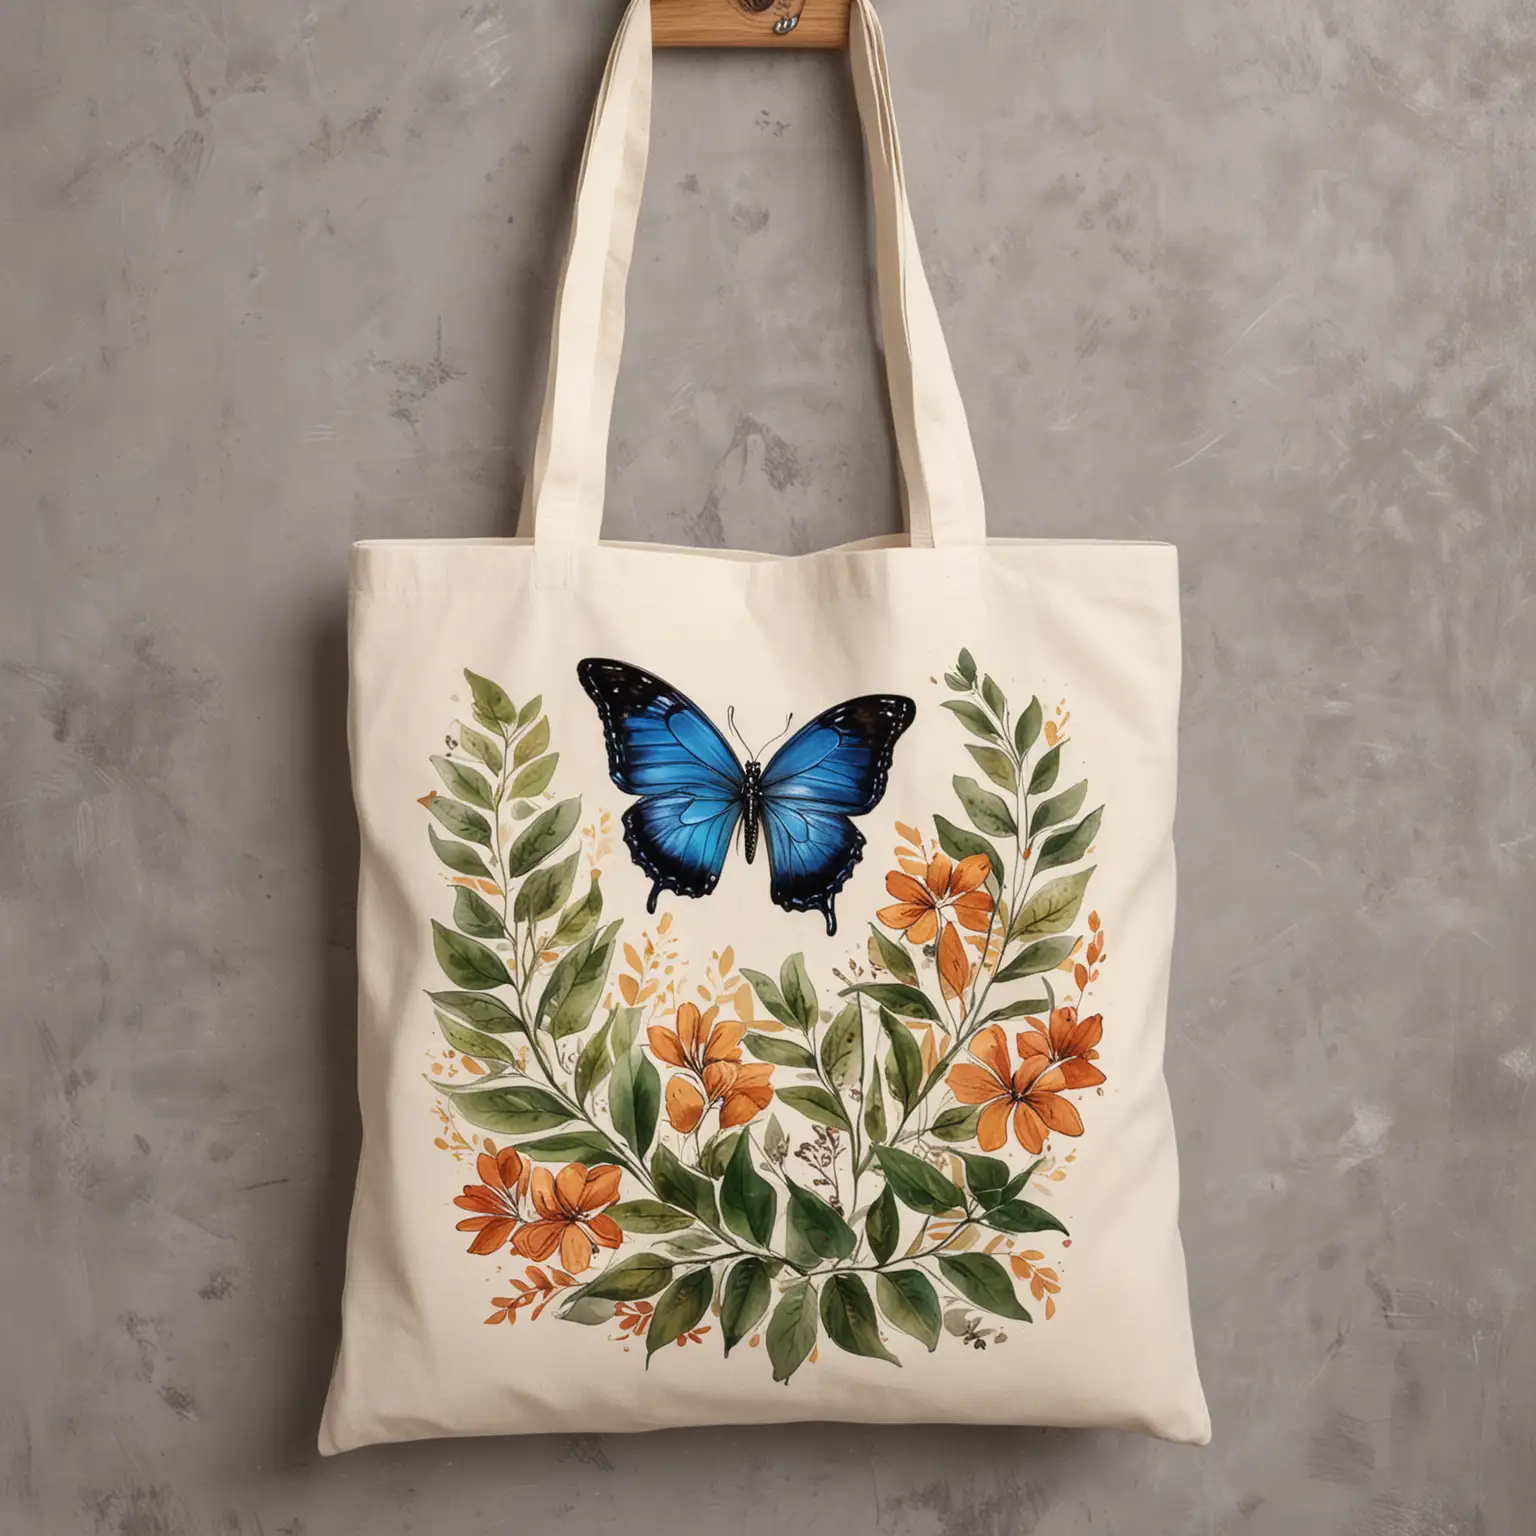 Colorful Tote Bag with Butterfly and Leaves Painting